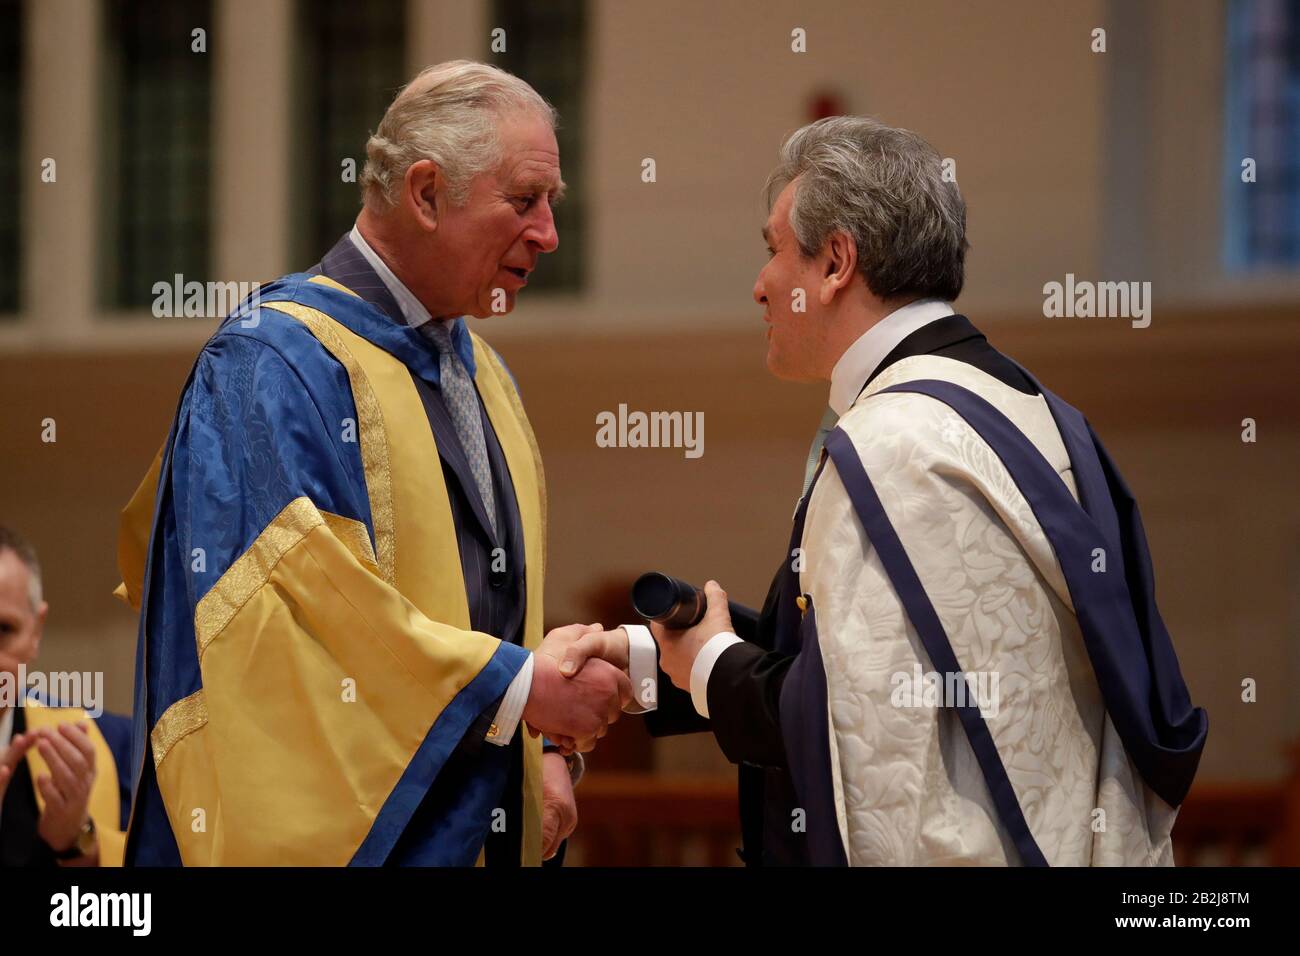 The Prince of Wales Charles presents English-Italian conductor and pianist Sir Antonio Pappano with an honorary Doctor of Music award at the Royal College of Music's annual awards in London. Stock Photo